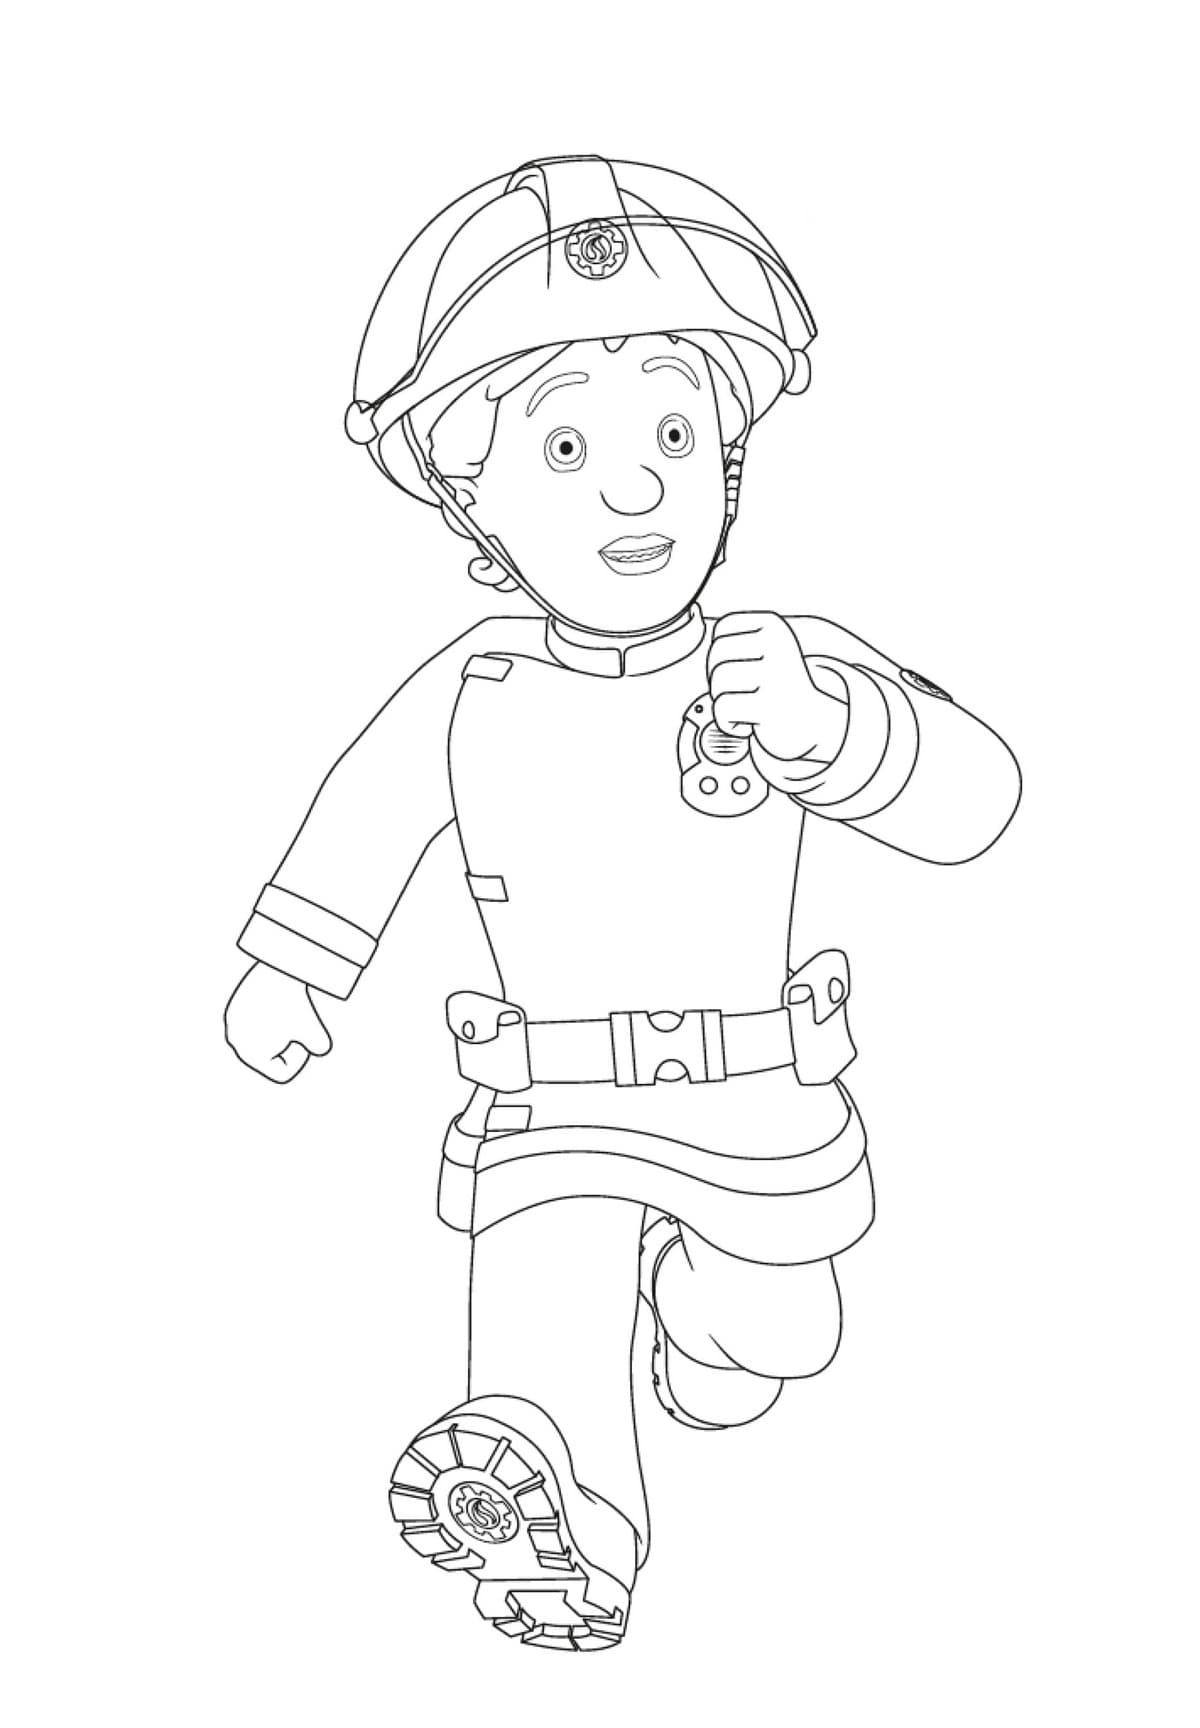 Download Coloring Pages Fireman Sam . 100 Coloring Pages Print for kids